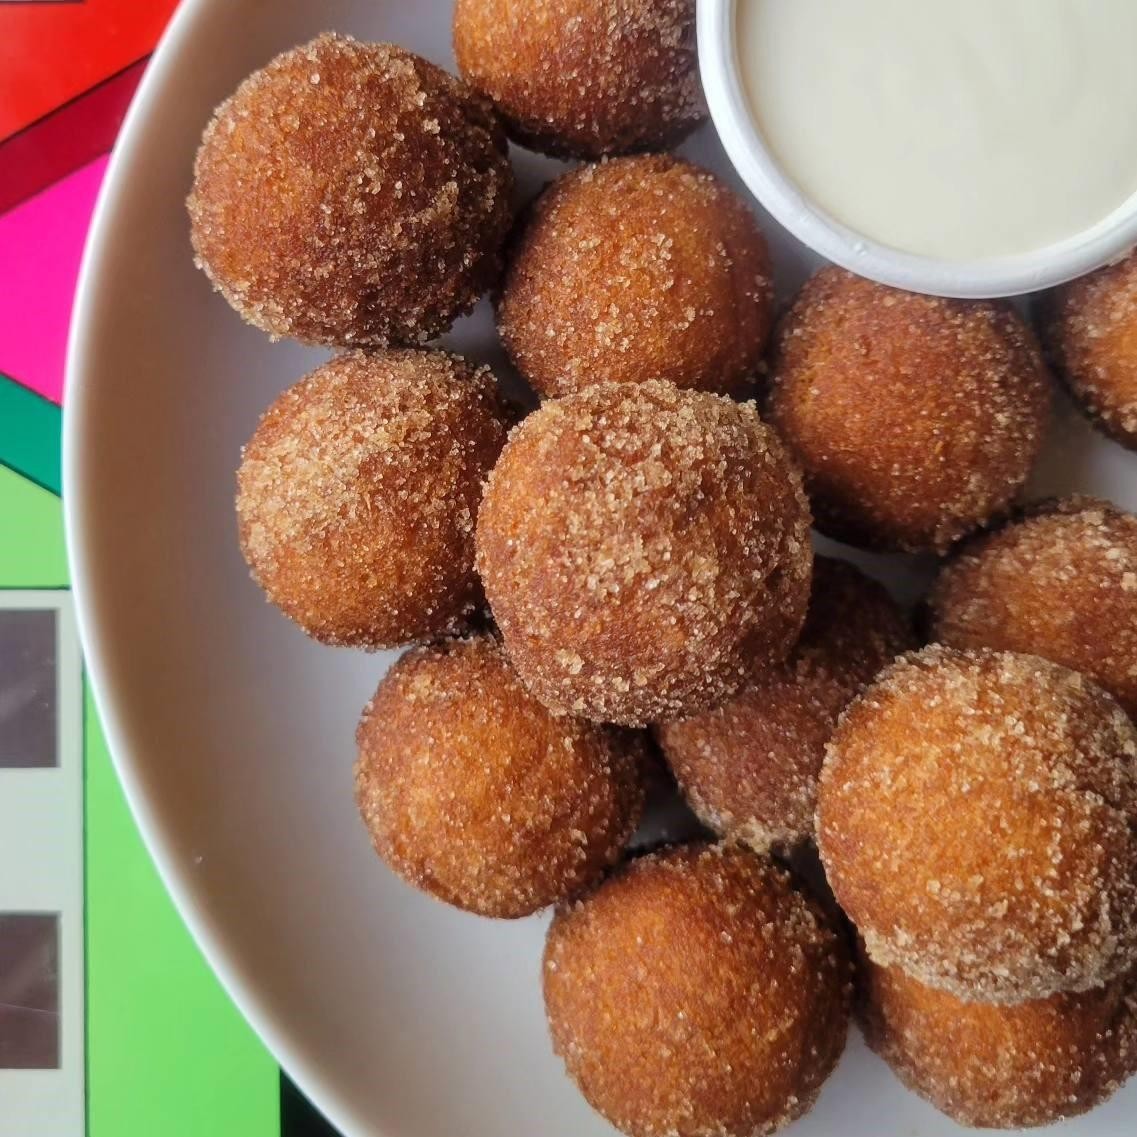 Fried Doughnut Holes - Tossed in Cinnamon and Sugar, Fondant Dipping Sauce